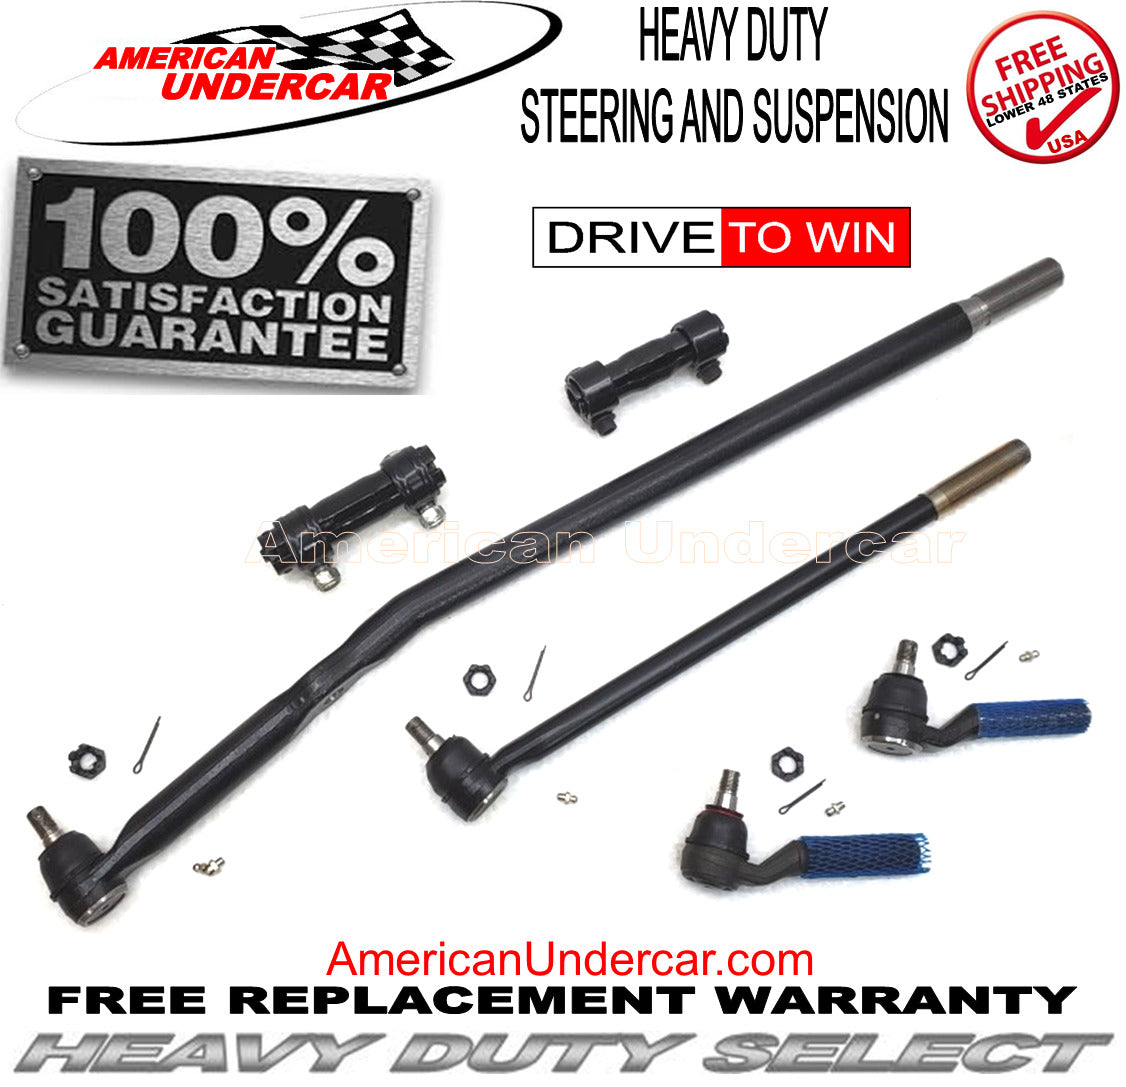 HD Tie Rod Drag Link Adjusting Sleeve Steering Kit for 1995-1997 Ford F250HD 4x4, Twin I Beam